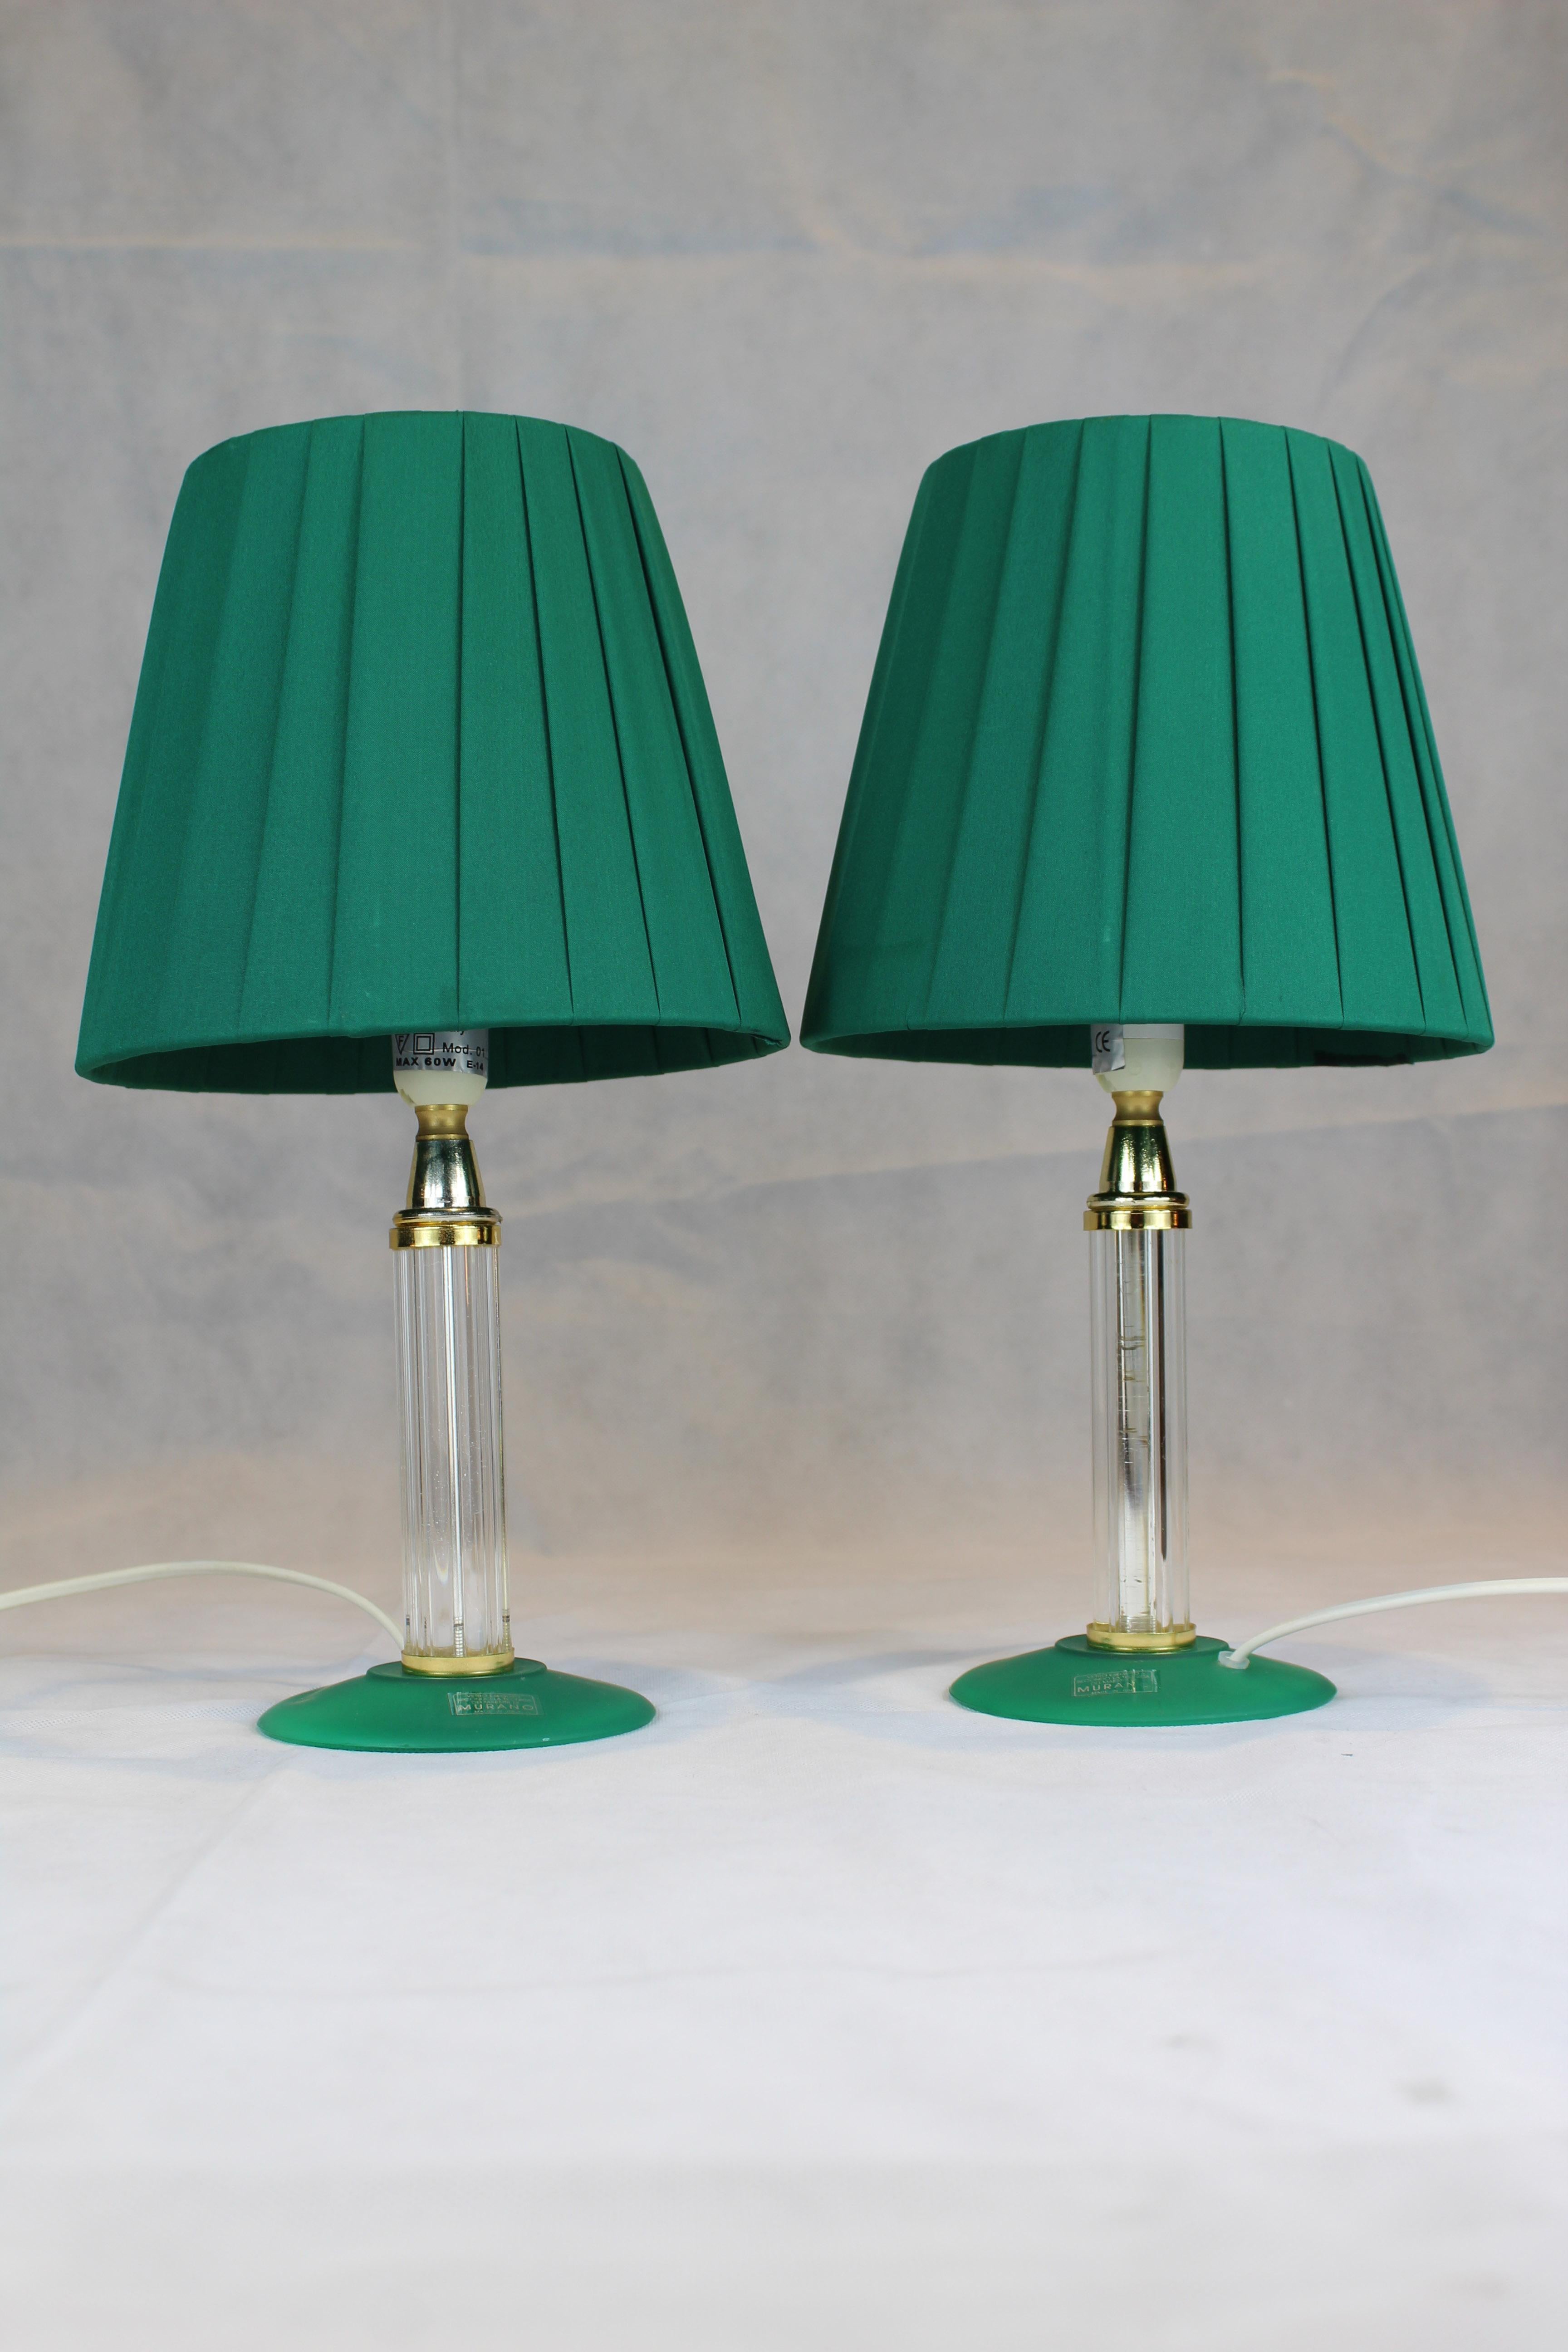 Italian Venetian Pair of Table Lamps , Murano Glass In Good Condition For Sale In Verona, IT